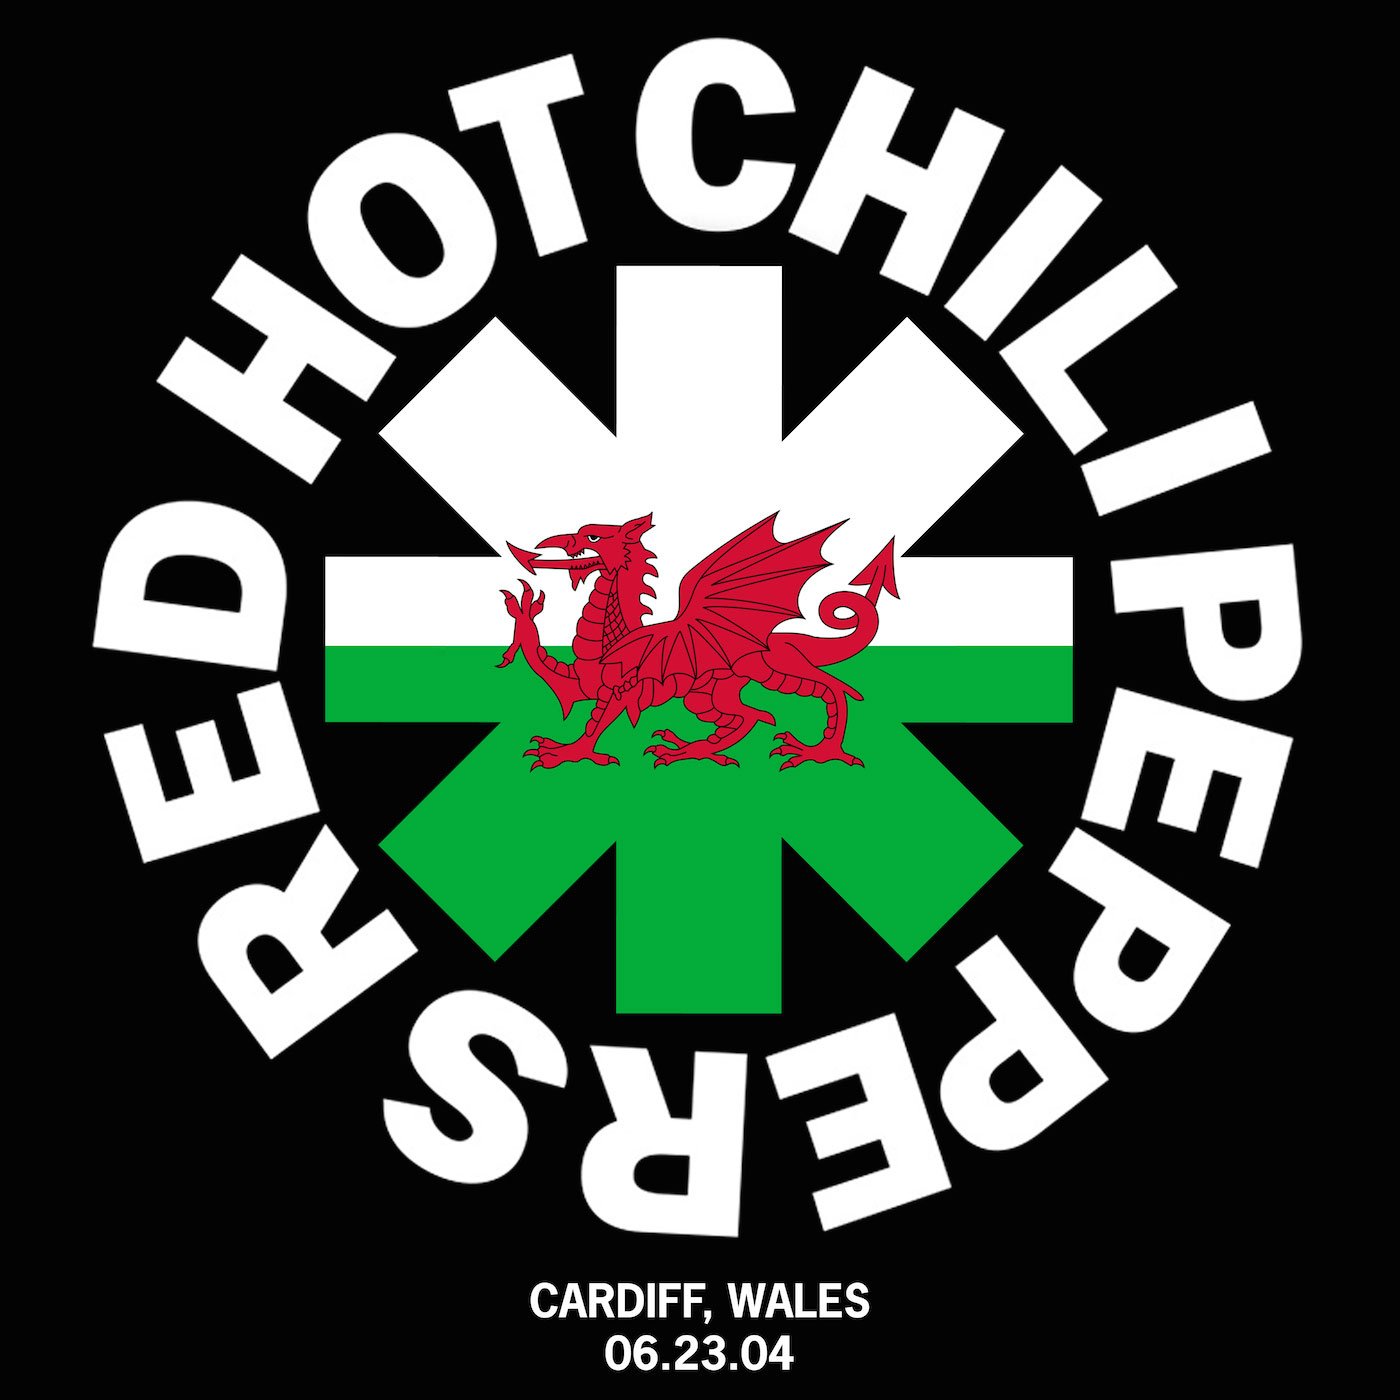 Red hot chili peppers mp3